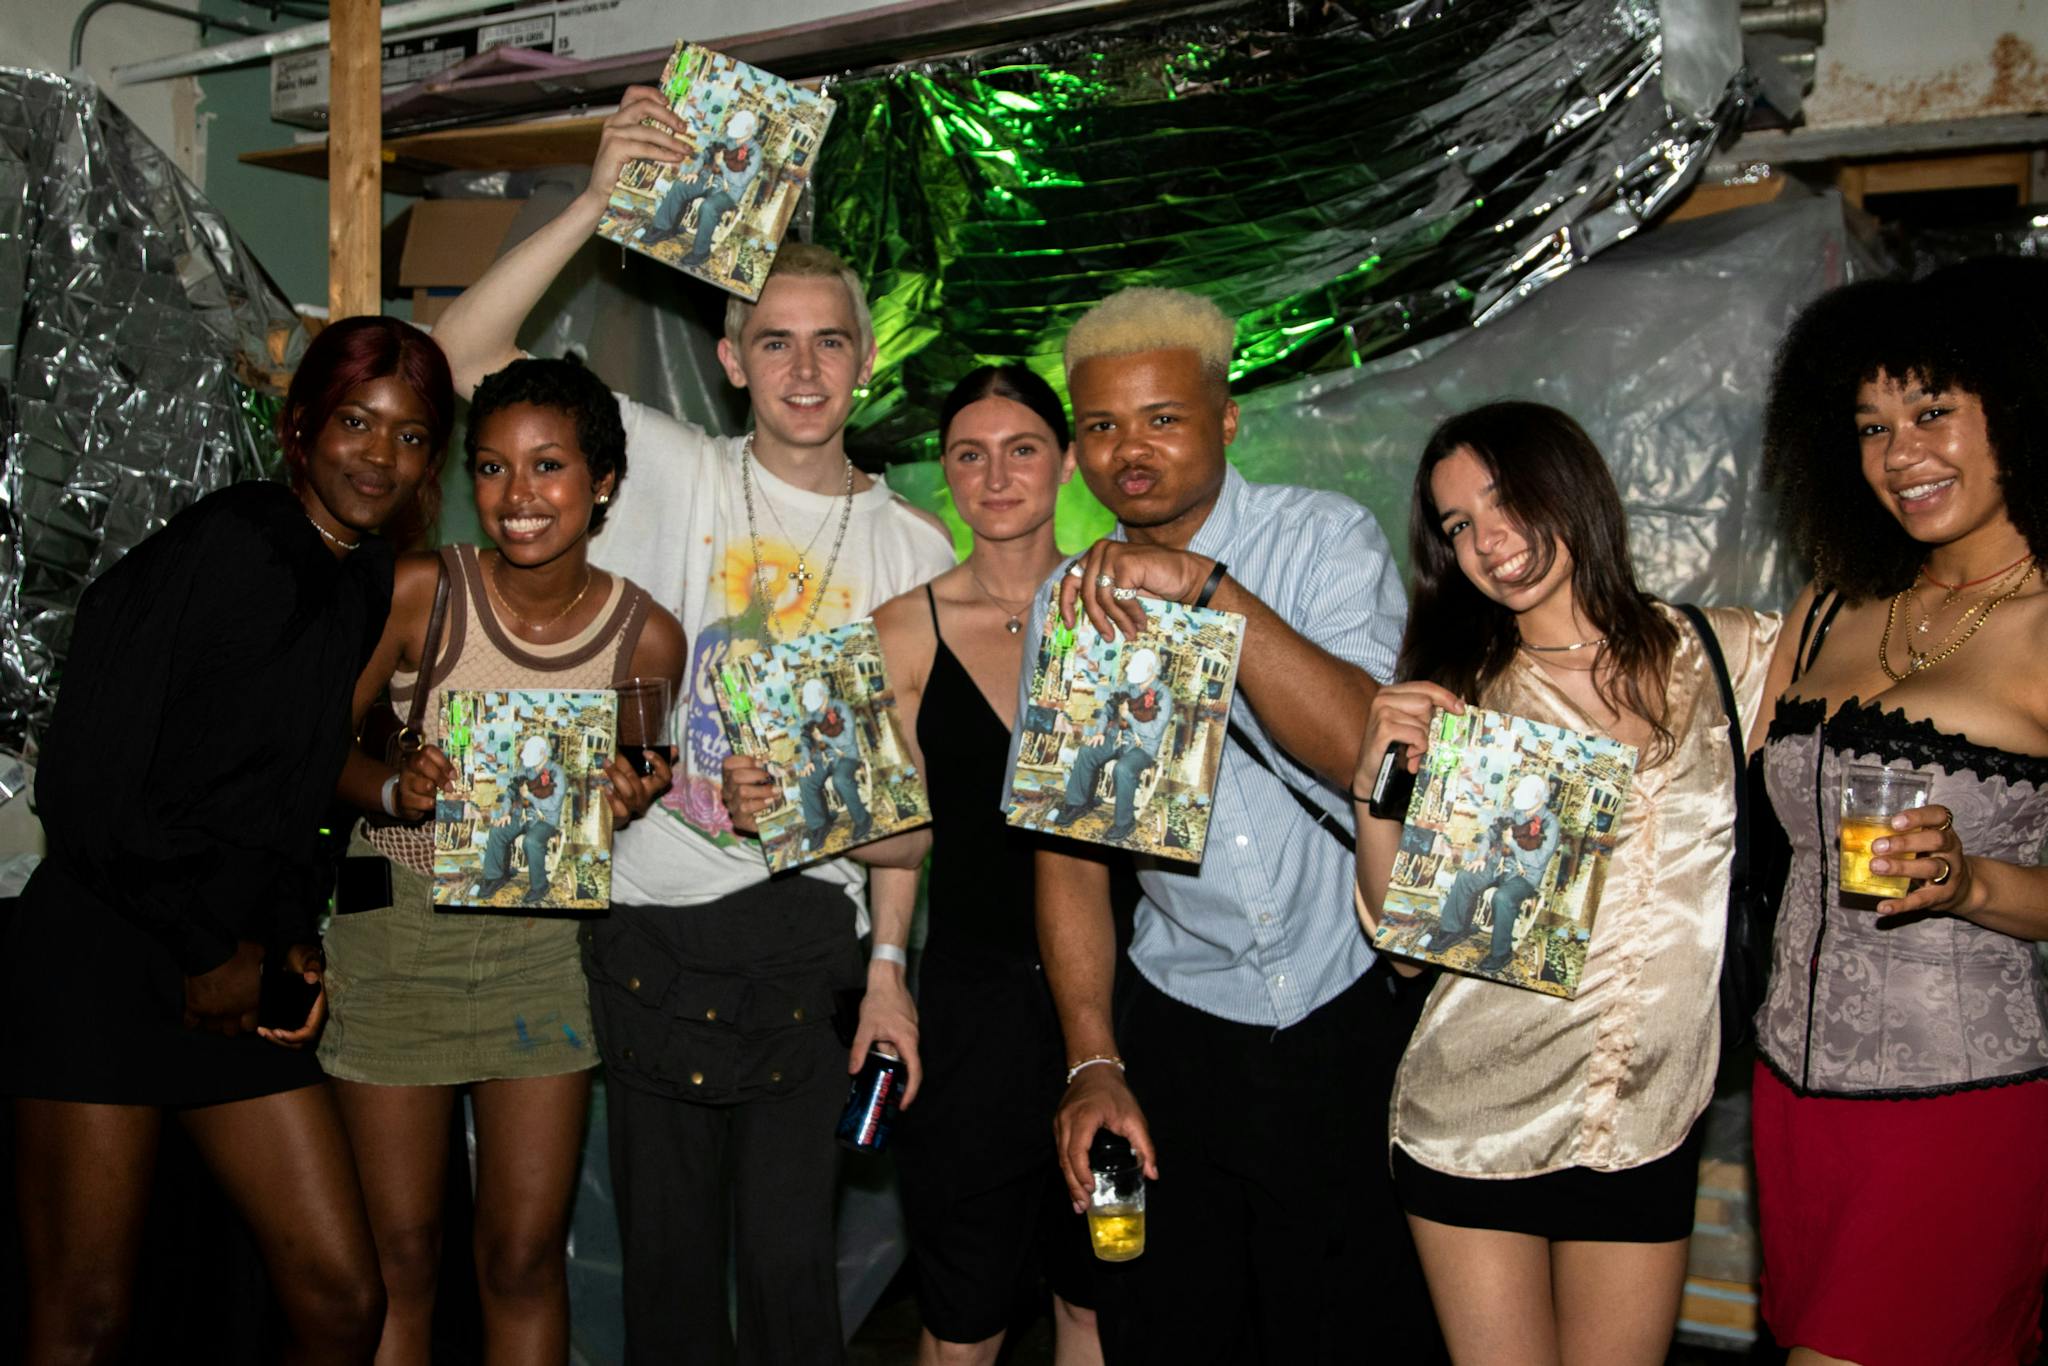 Guests have fun at Boston Art Review's Issue 08 launch party.